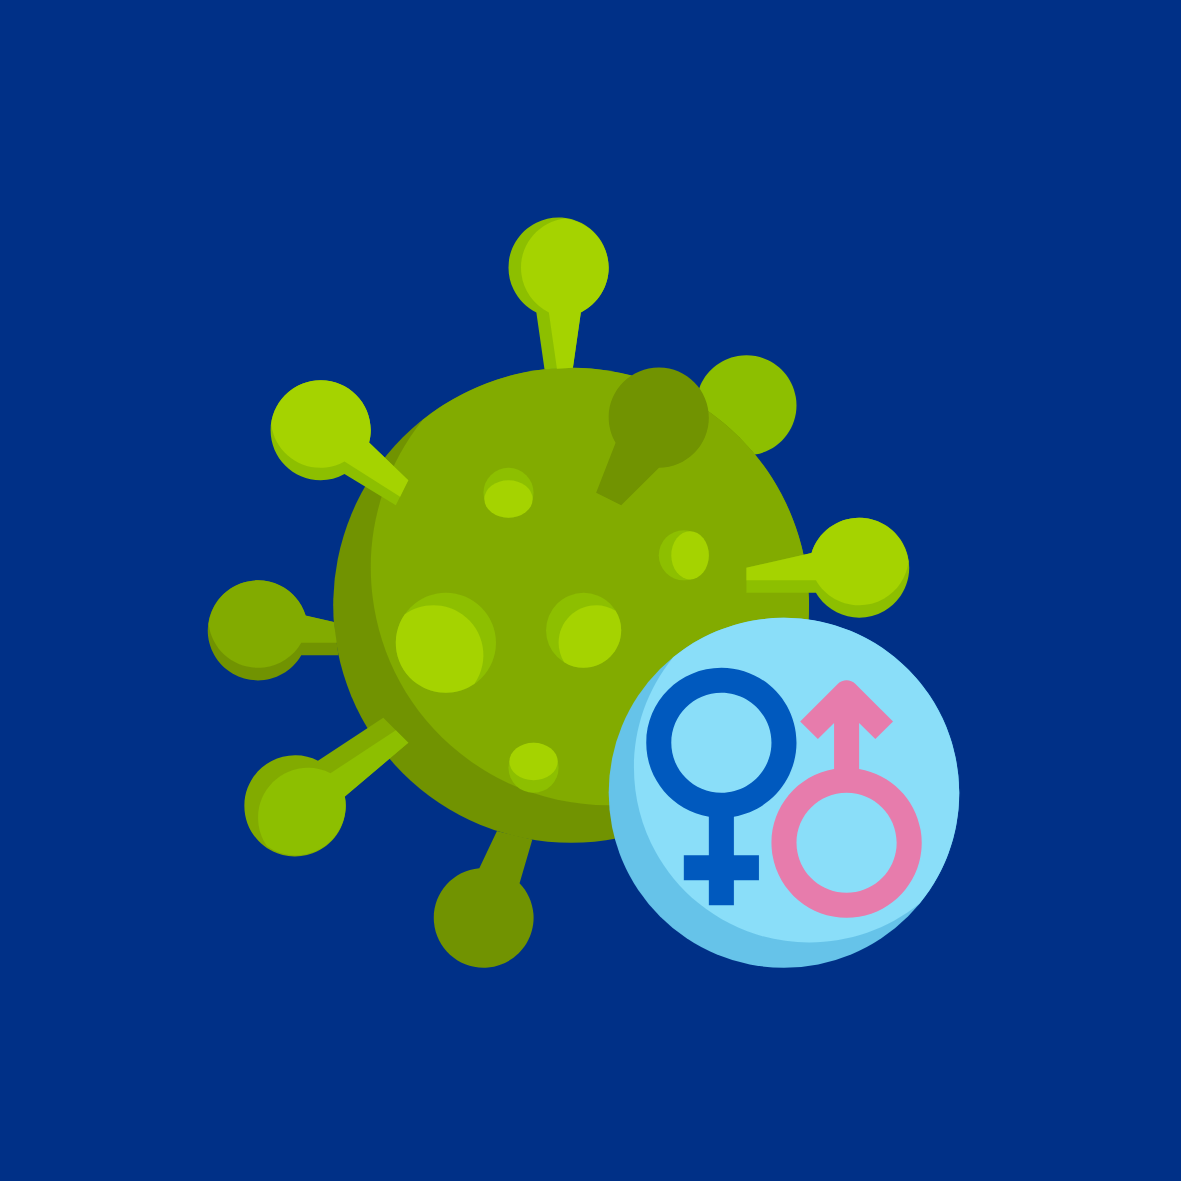 Image of a Biological Cell and the Male and Female Symbols